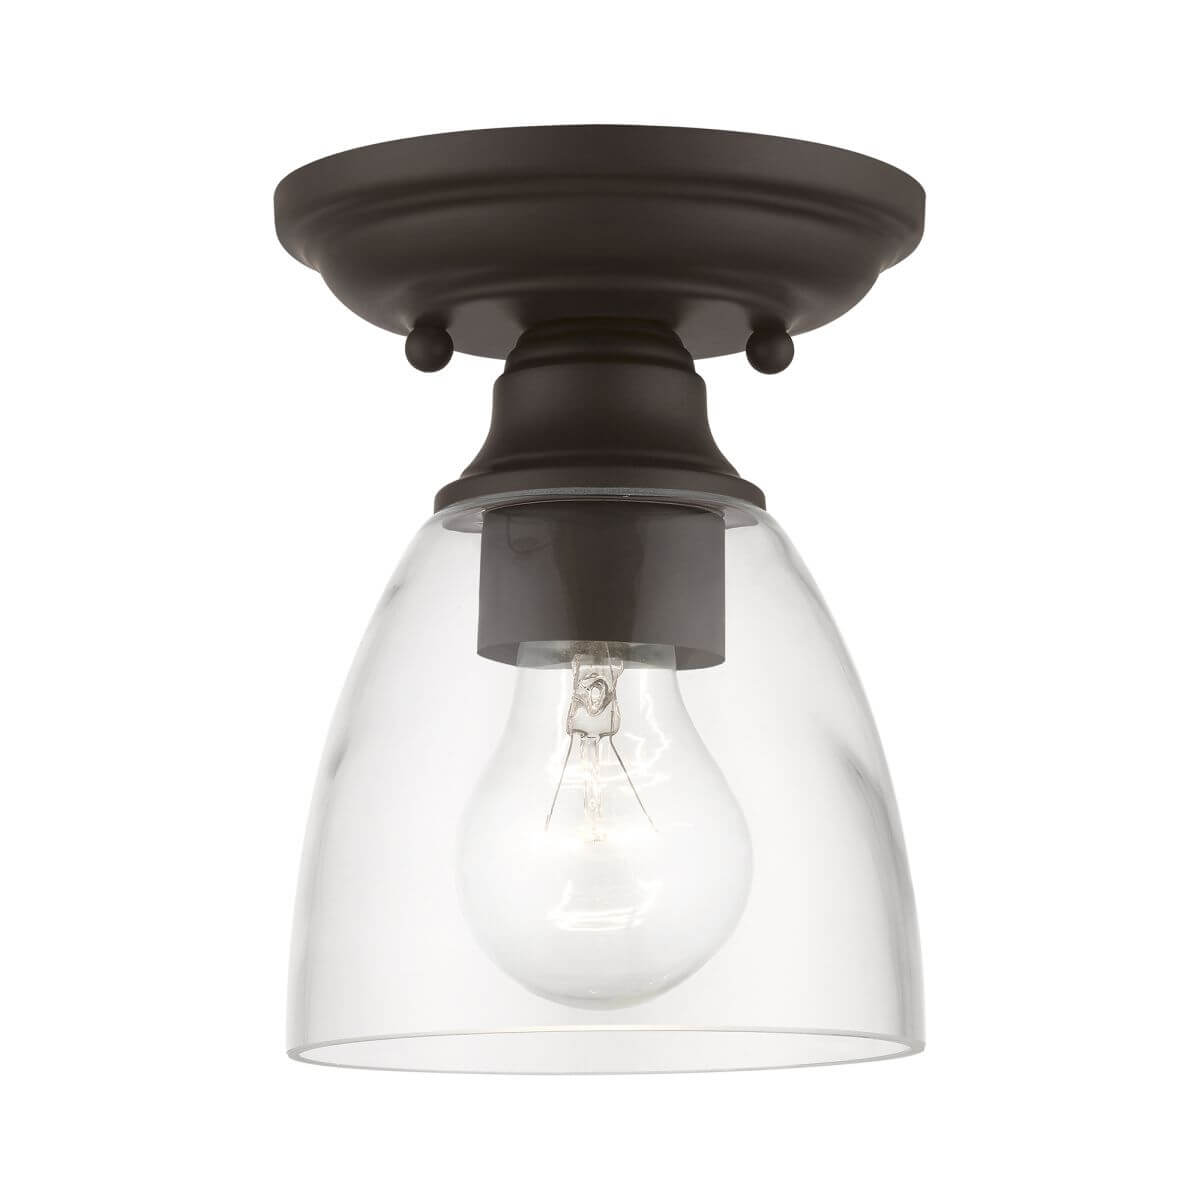 Livex 46331-07 Montgomery 1 Light 5 inch Petite Semi-Flush Mount in Bronze with Hand Blown Clear Glass